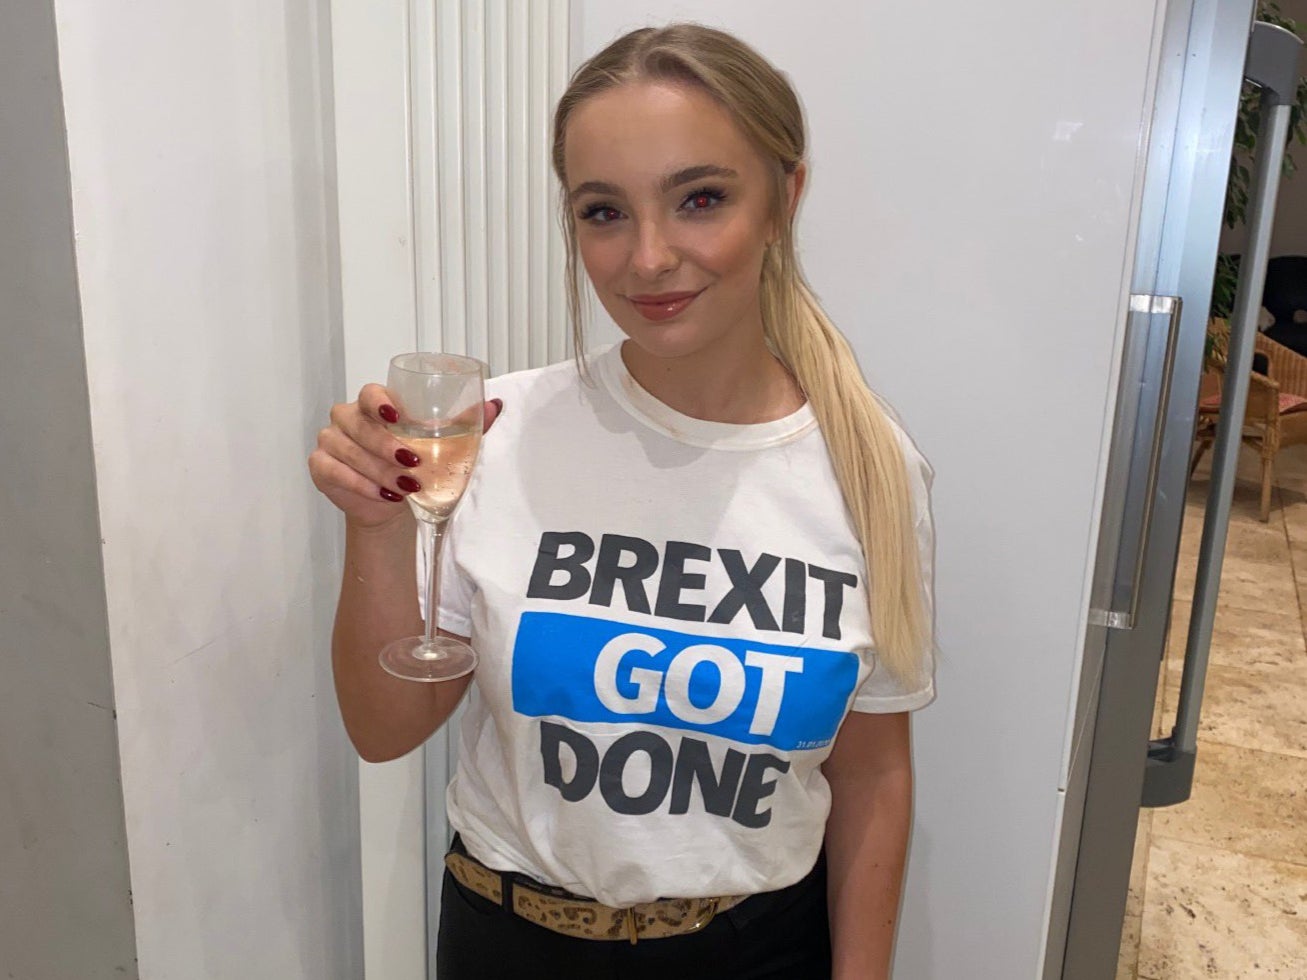 Brexit supporter Emily Hewertson celebrates trade deal ahead of the UK’s exit from EU single market